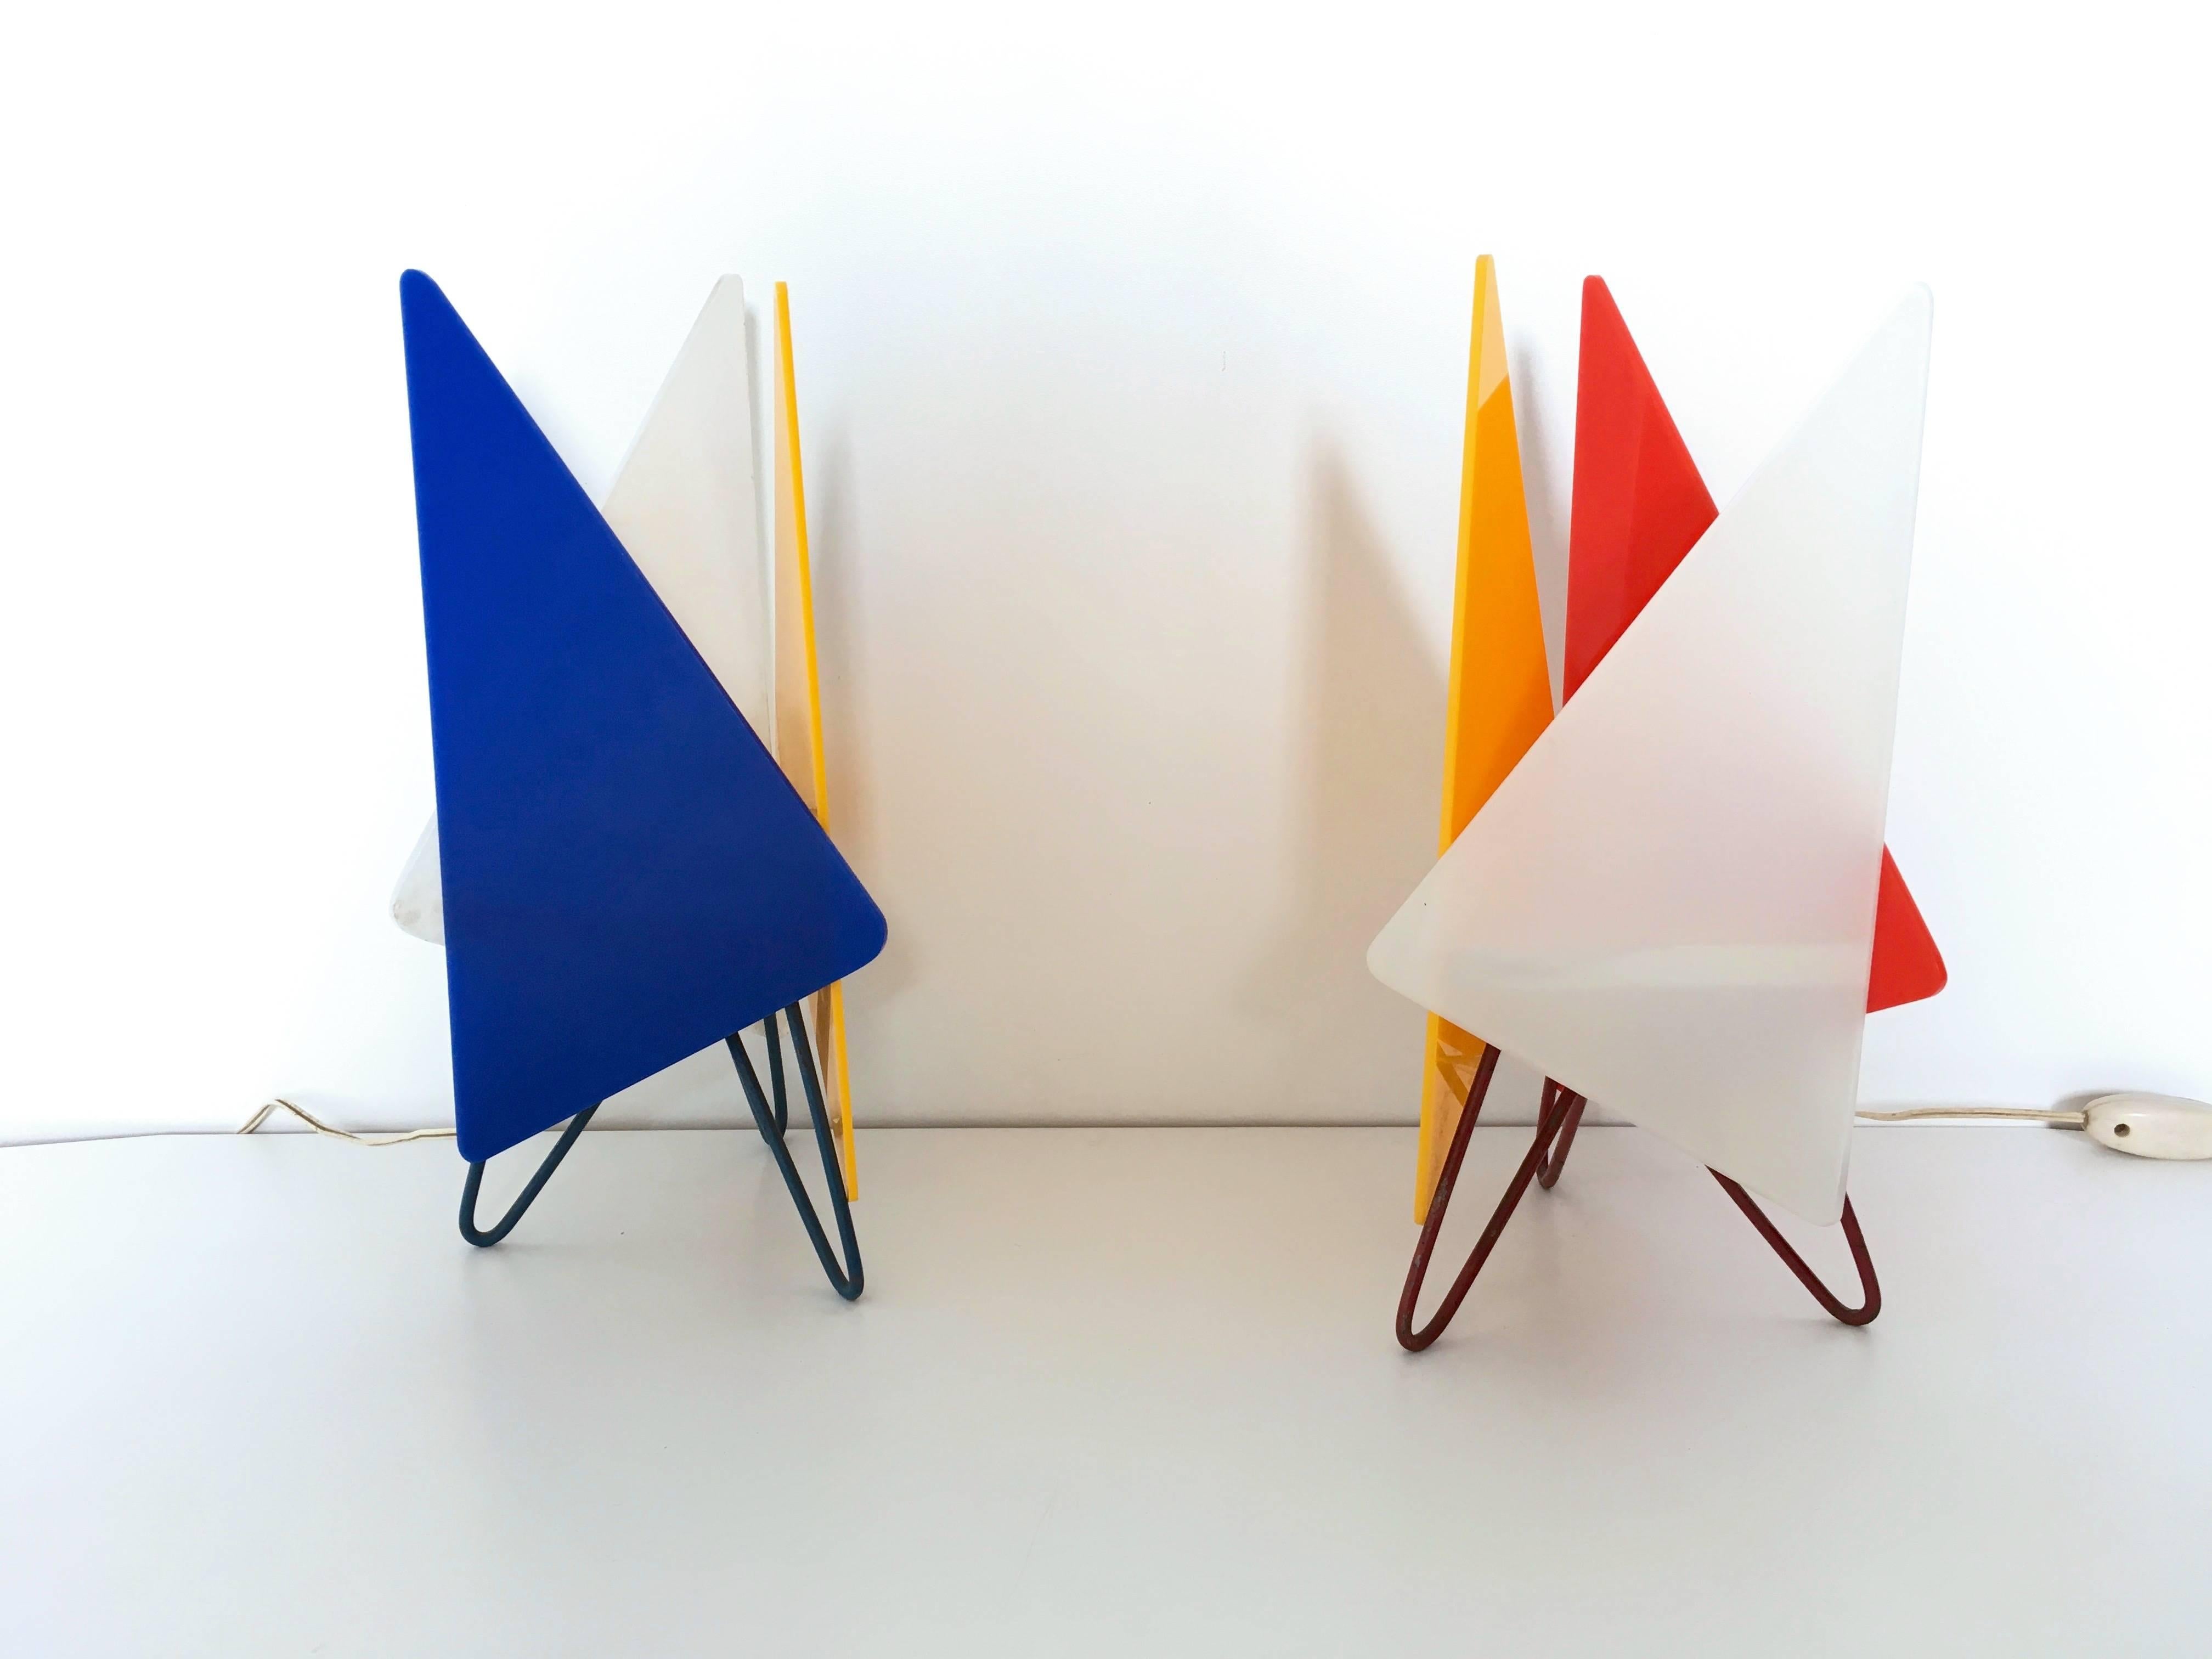 This pair of 1950s table lamps are made from colored plexiglass and painted iron.